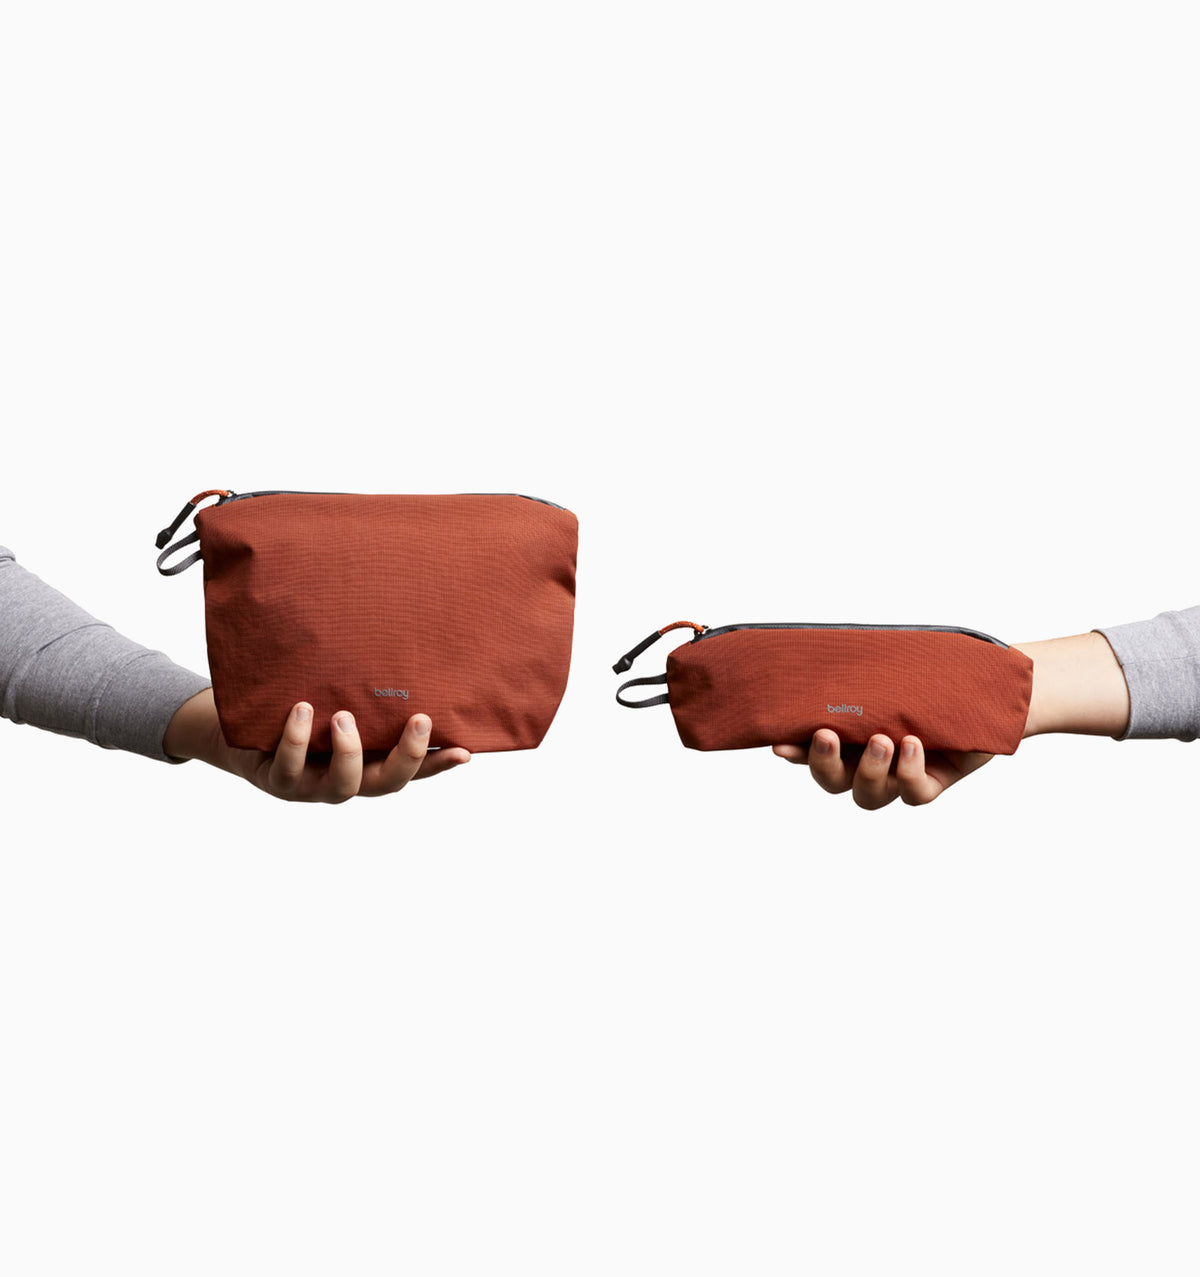 Bellroy Lite Pouch Duo - Clay